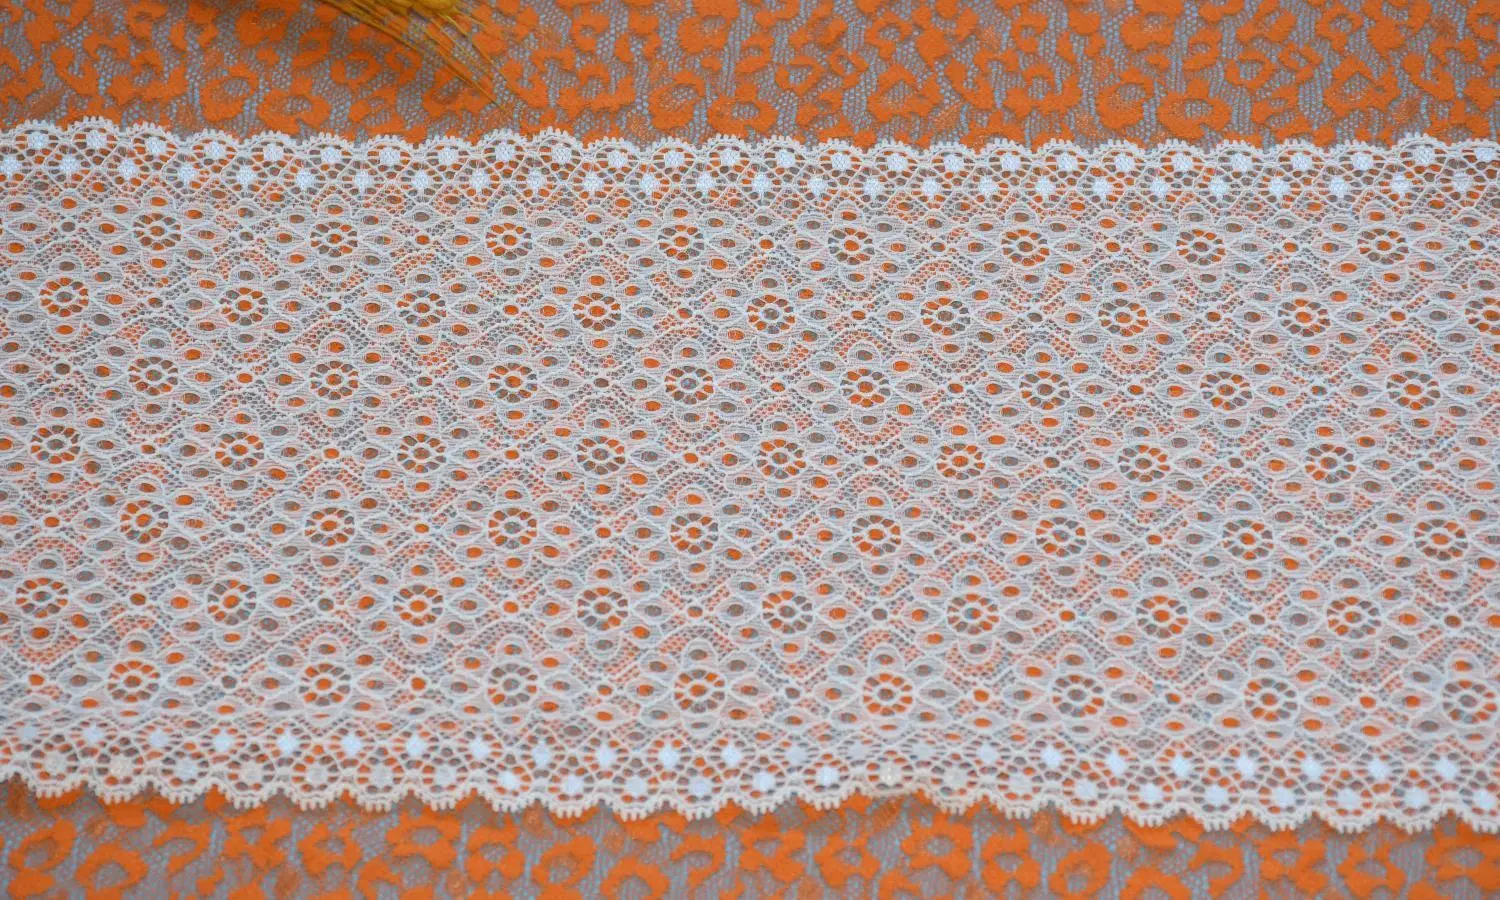 Cotton Lace Fabric Embroidery Lace Trim for Garment Accessories